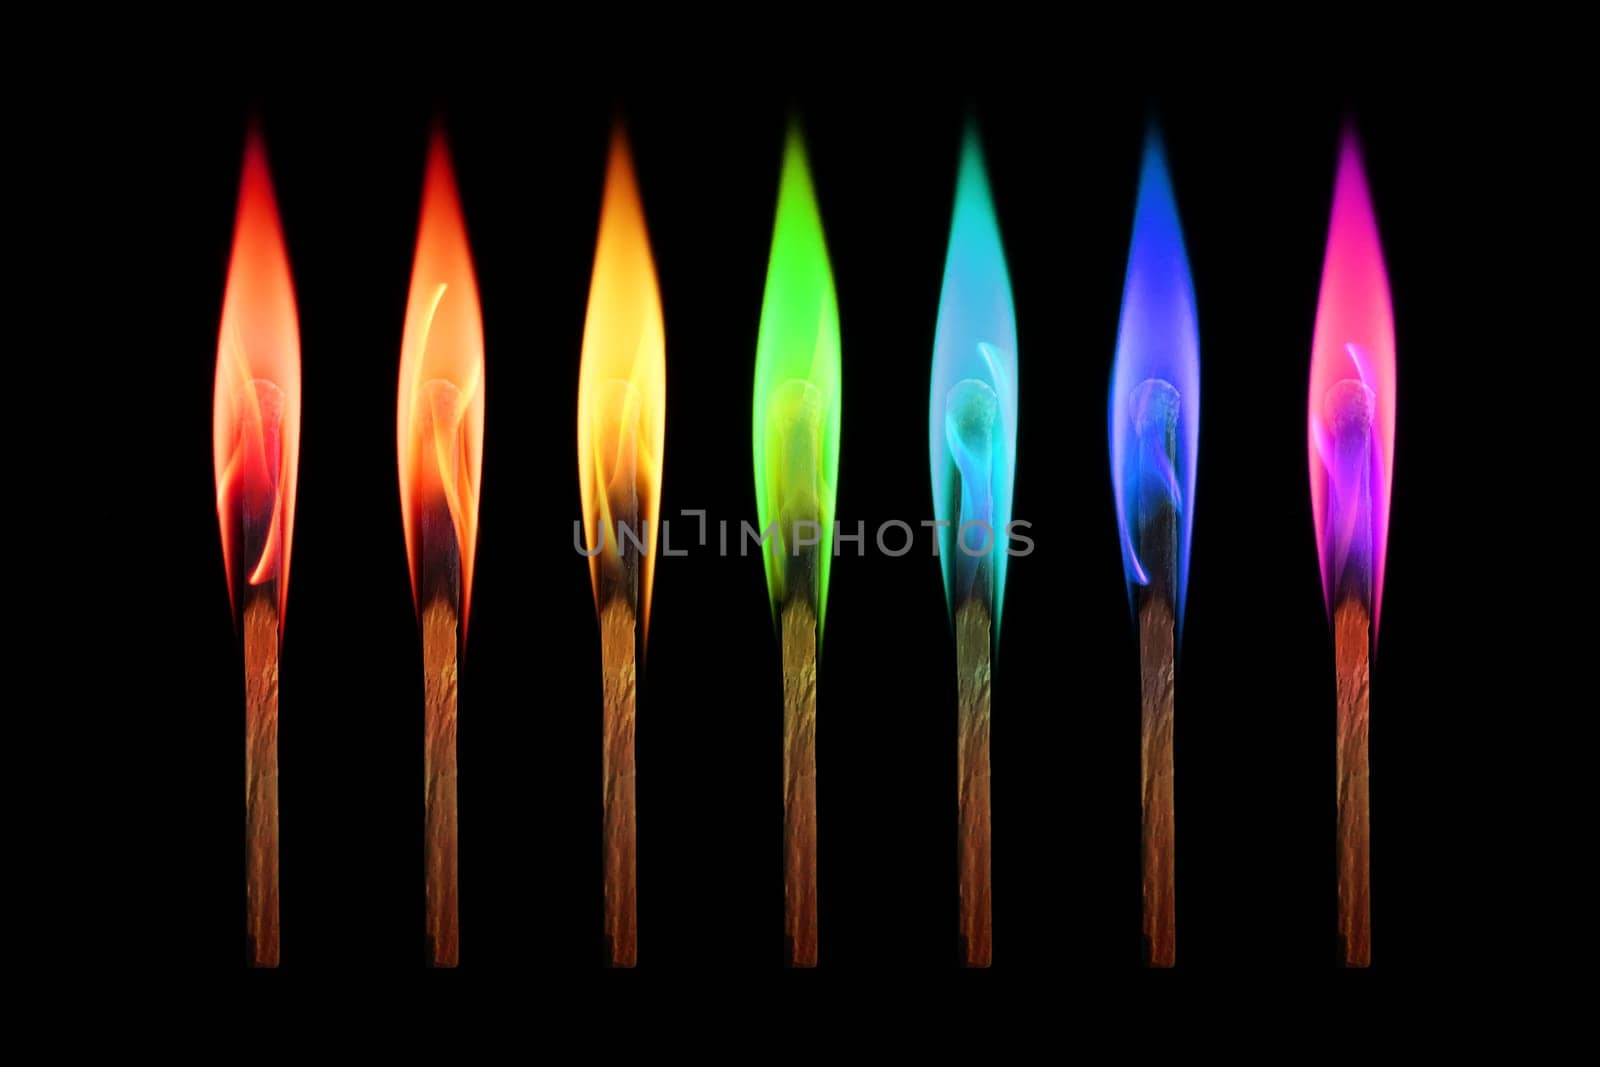 Matches burning in the rainbow colors flames on black background. Individuality concept